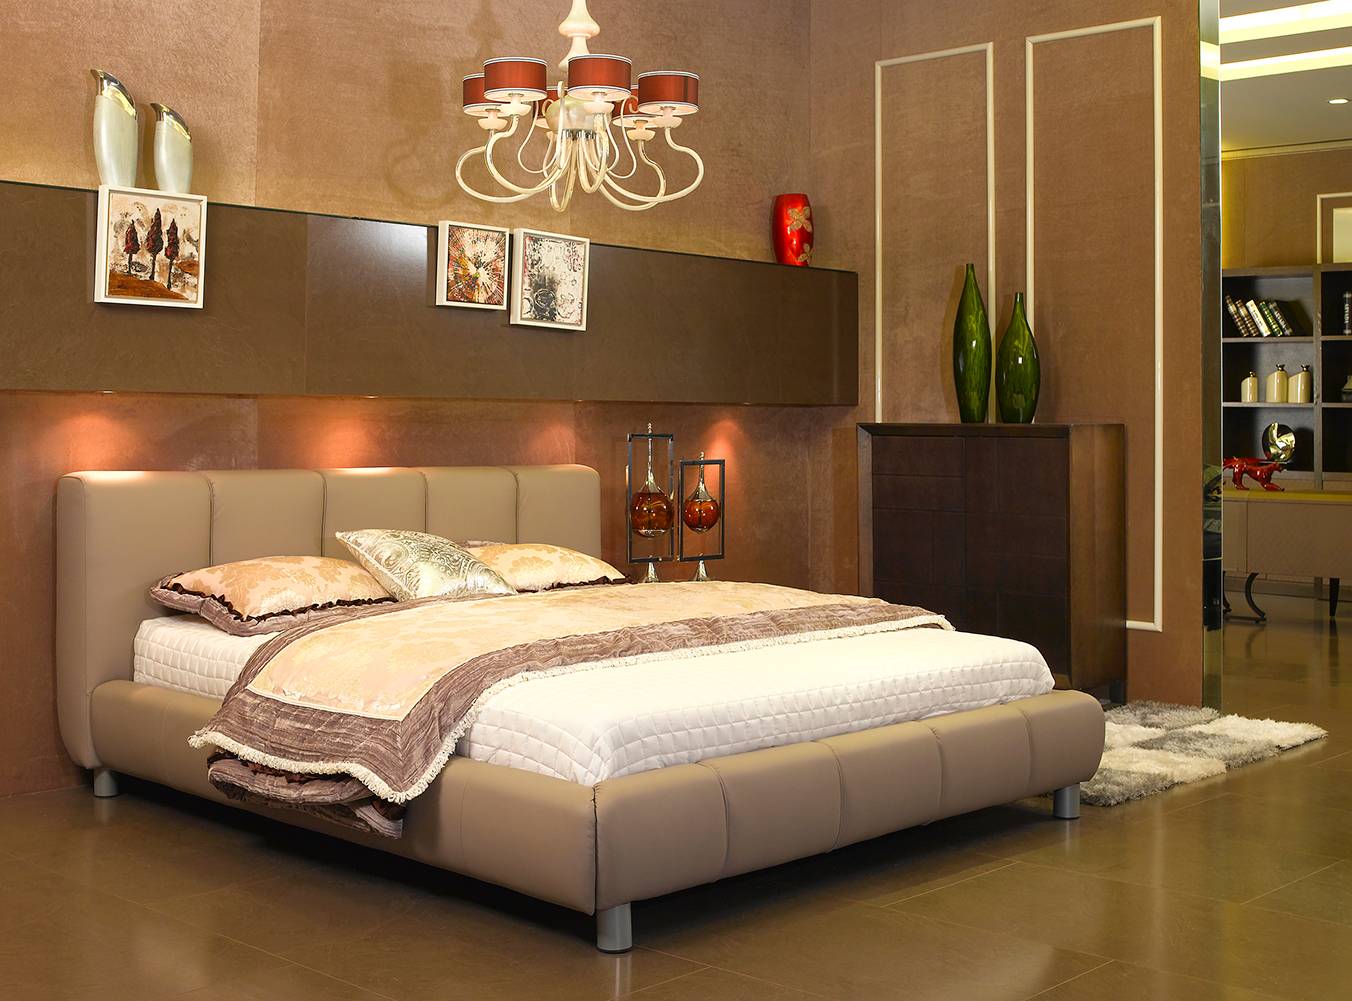 YuanFangYuan's Voude brand luxury bedroom sets are designed for high-end clients, including star-rated hotels and villas.